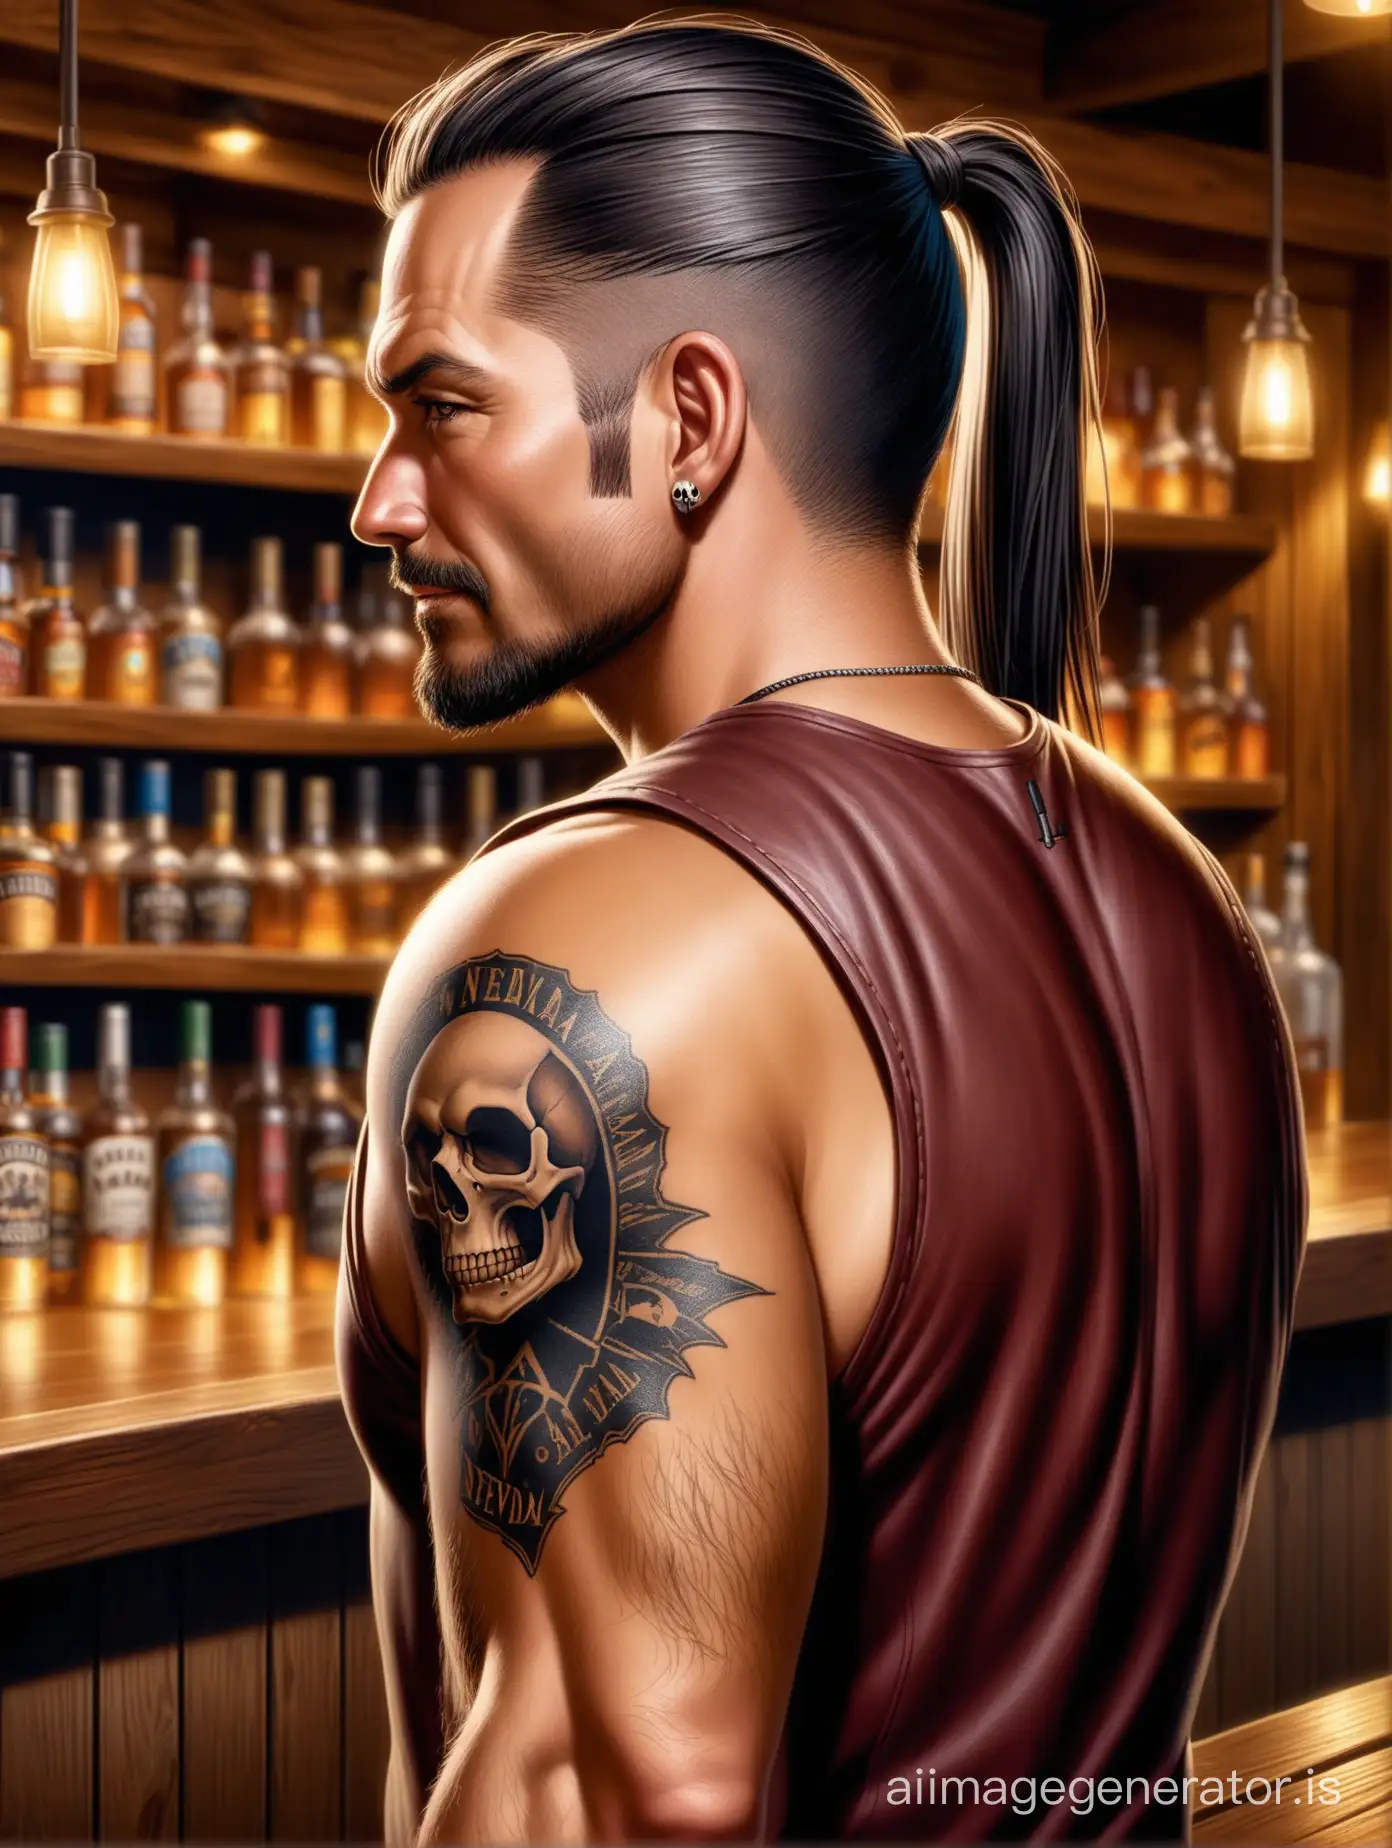 Middleaged-Man-in-a-Nevada-Bar-with-Skull-Tattoo-on-Shoulder